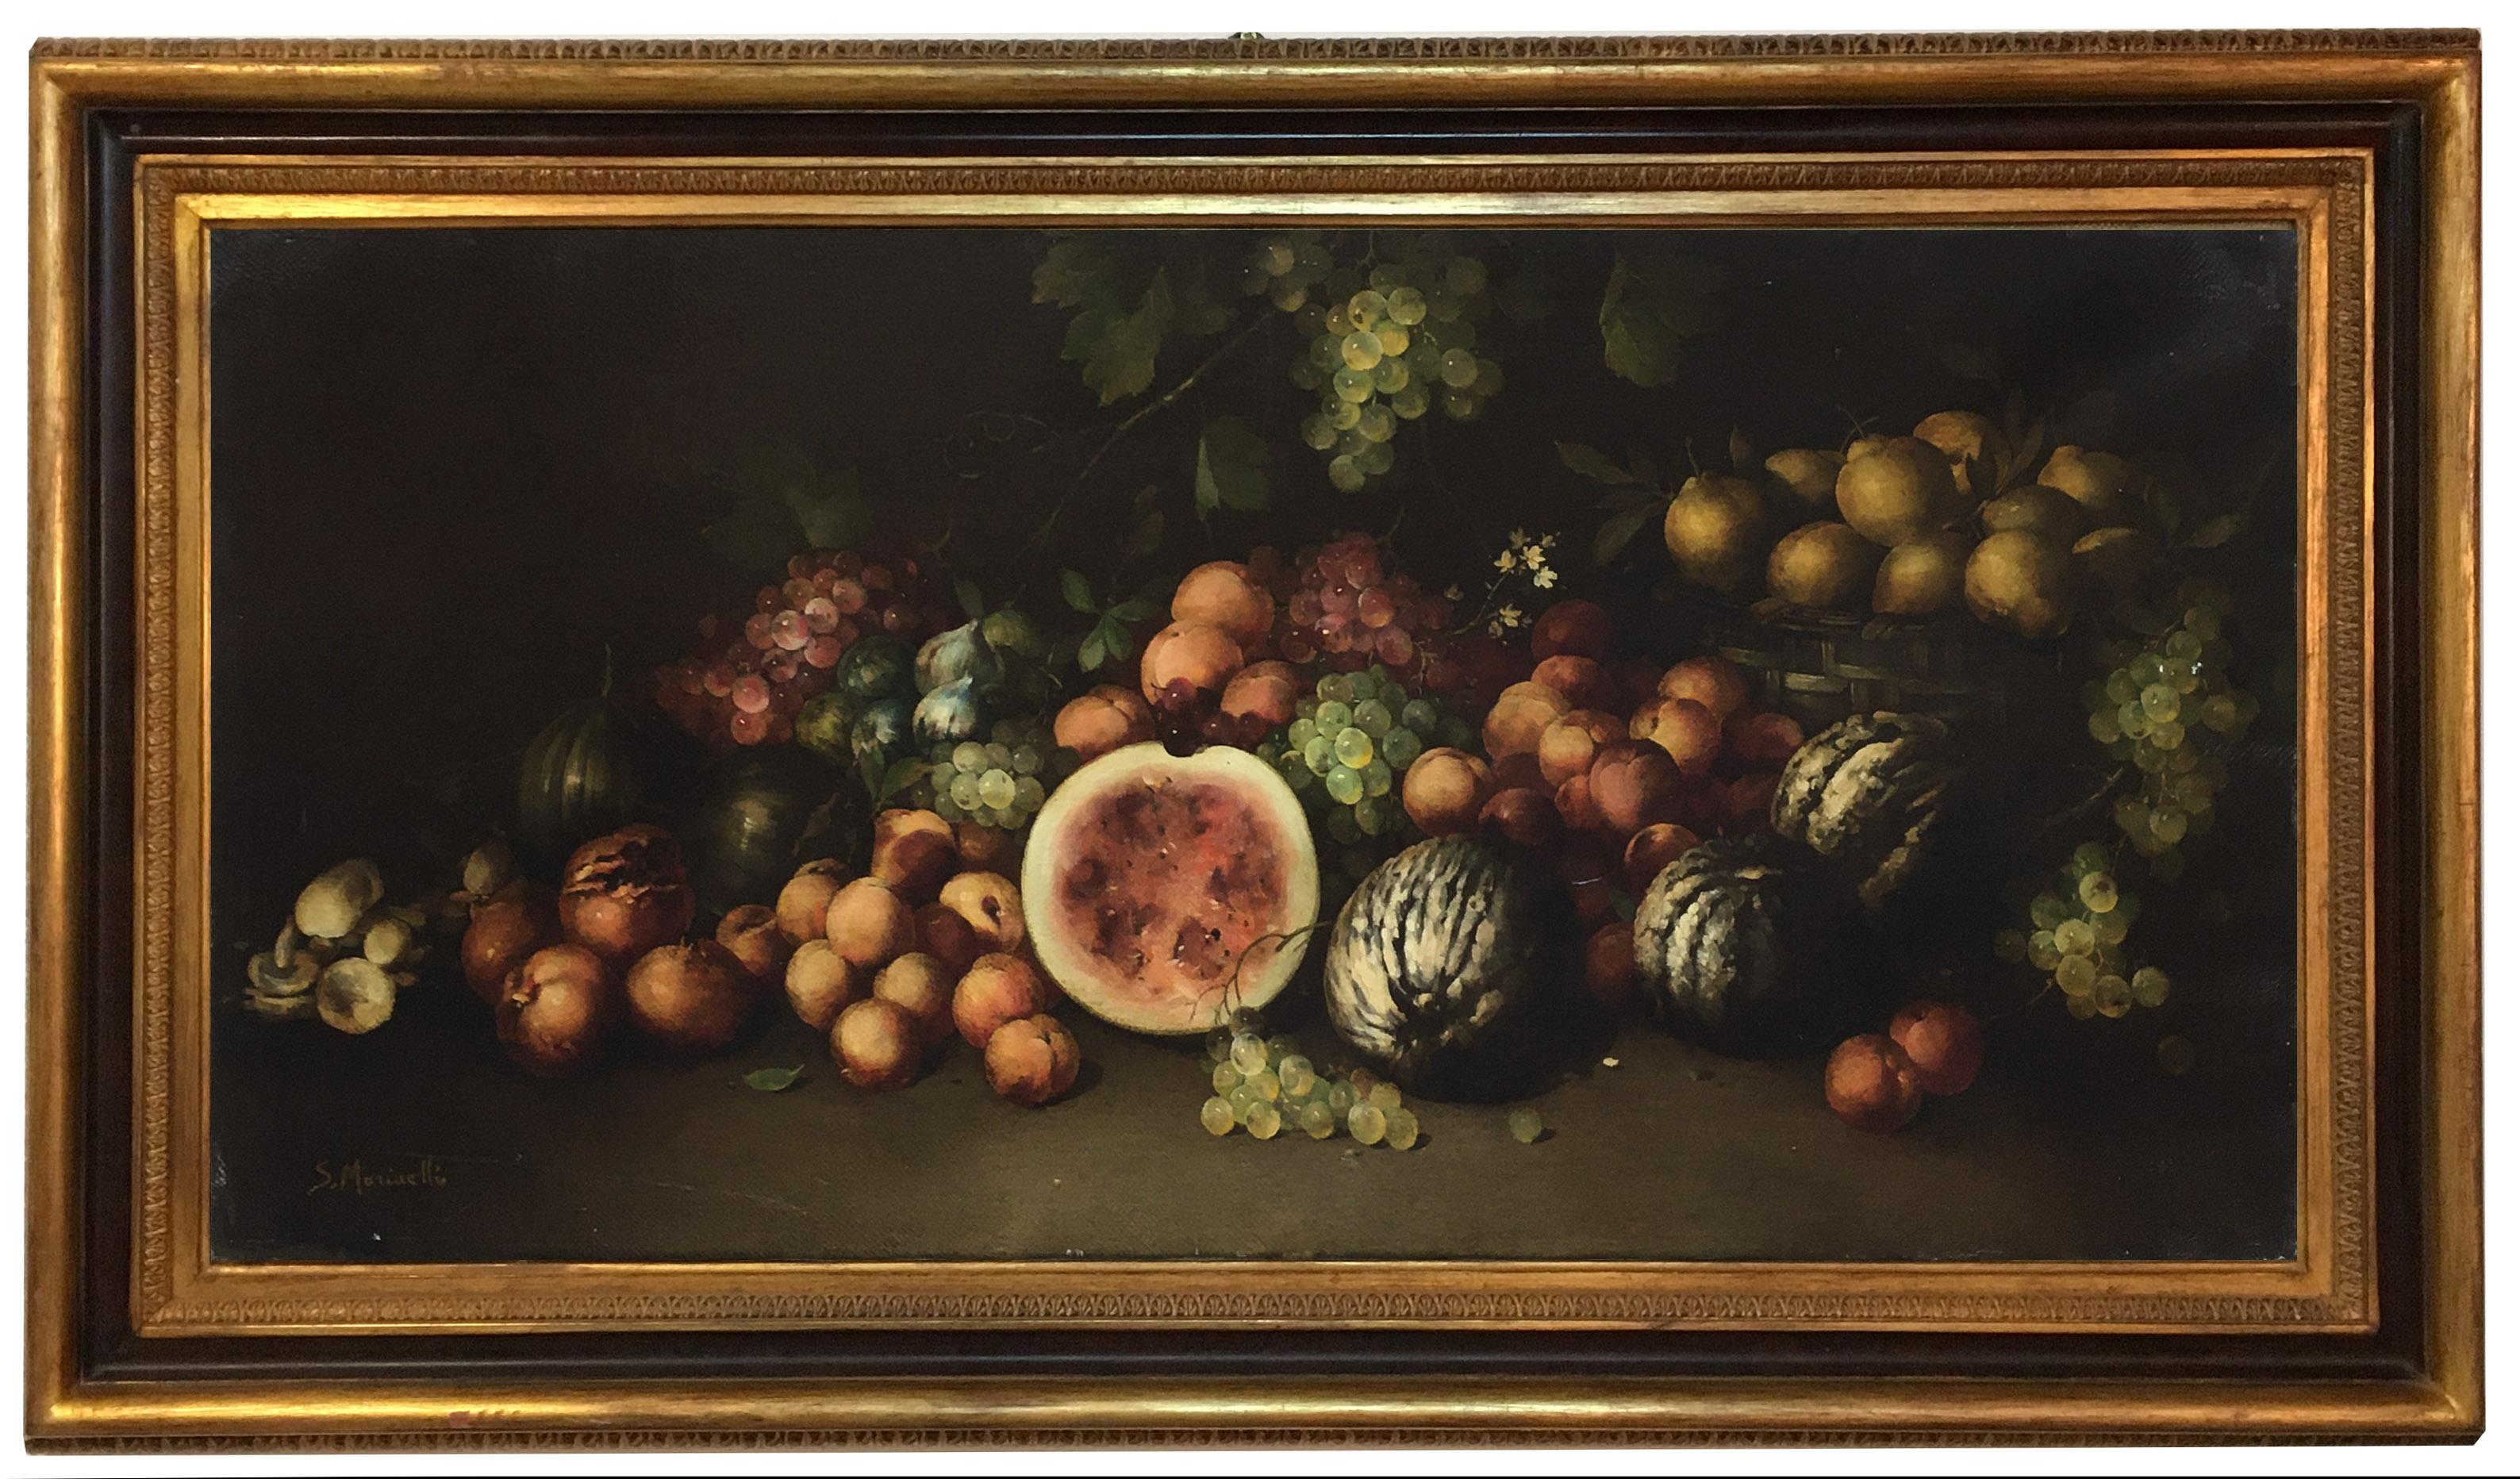 STILL LIFE - In the Manner of  Adriaen Coorte - Oil on Canvas  Italian Painting 